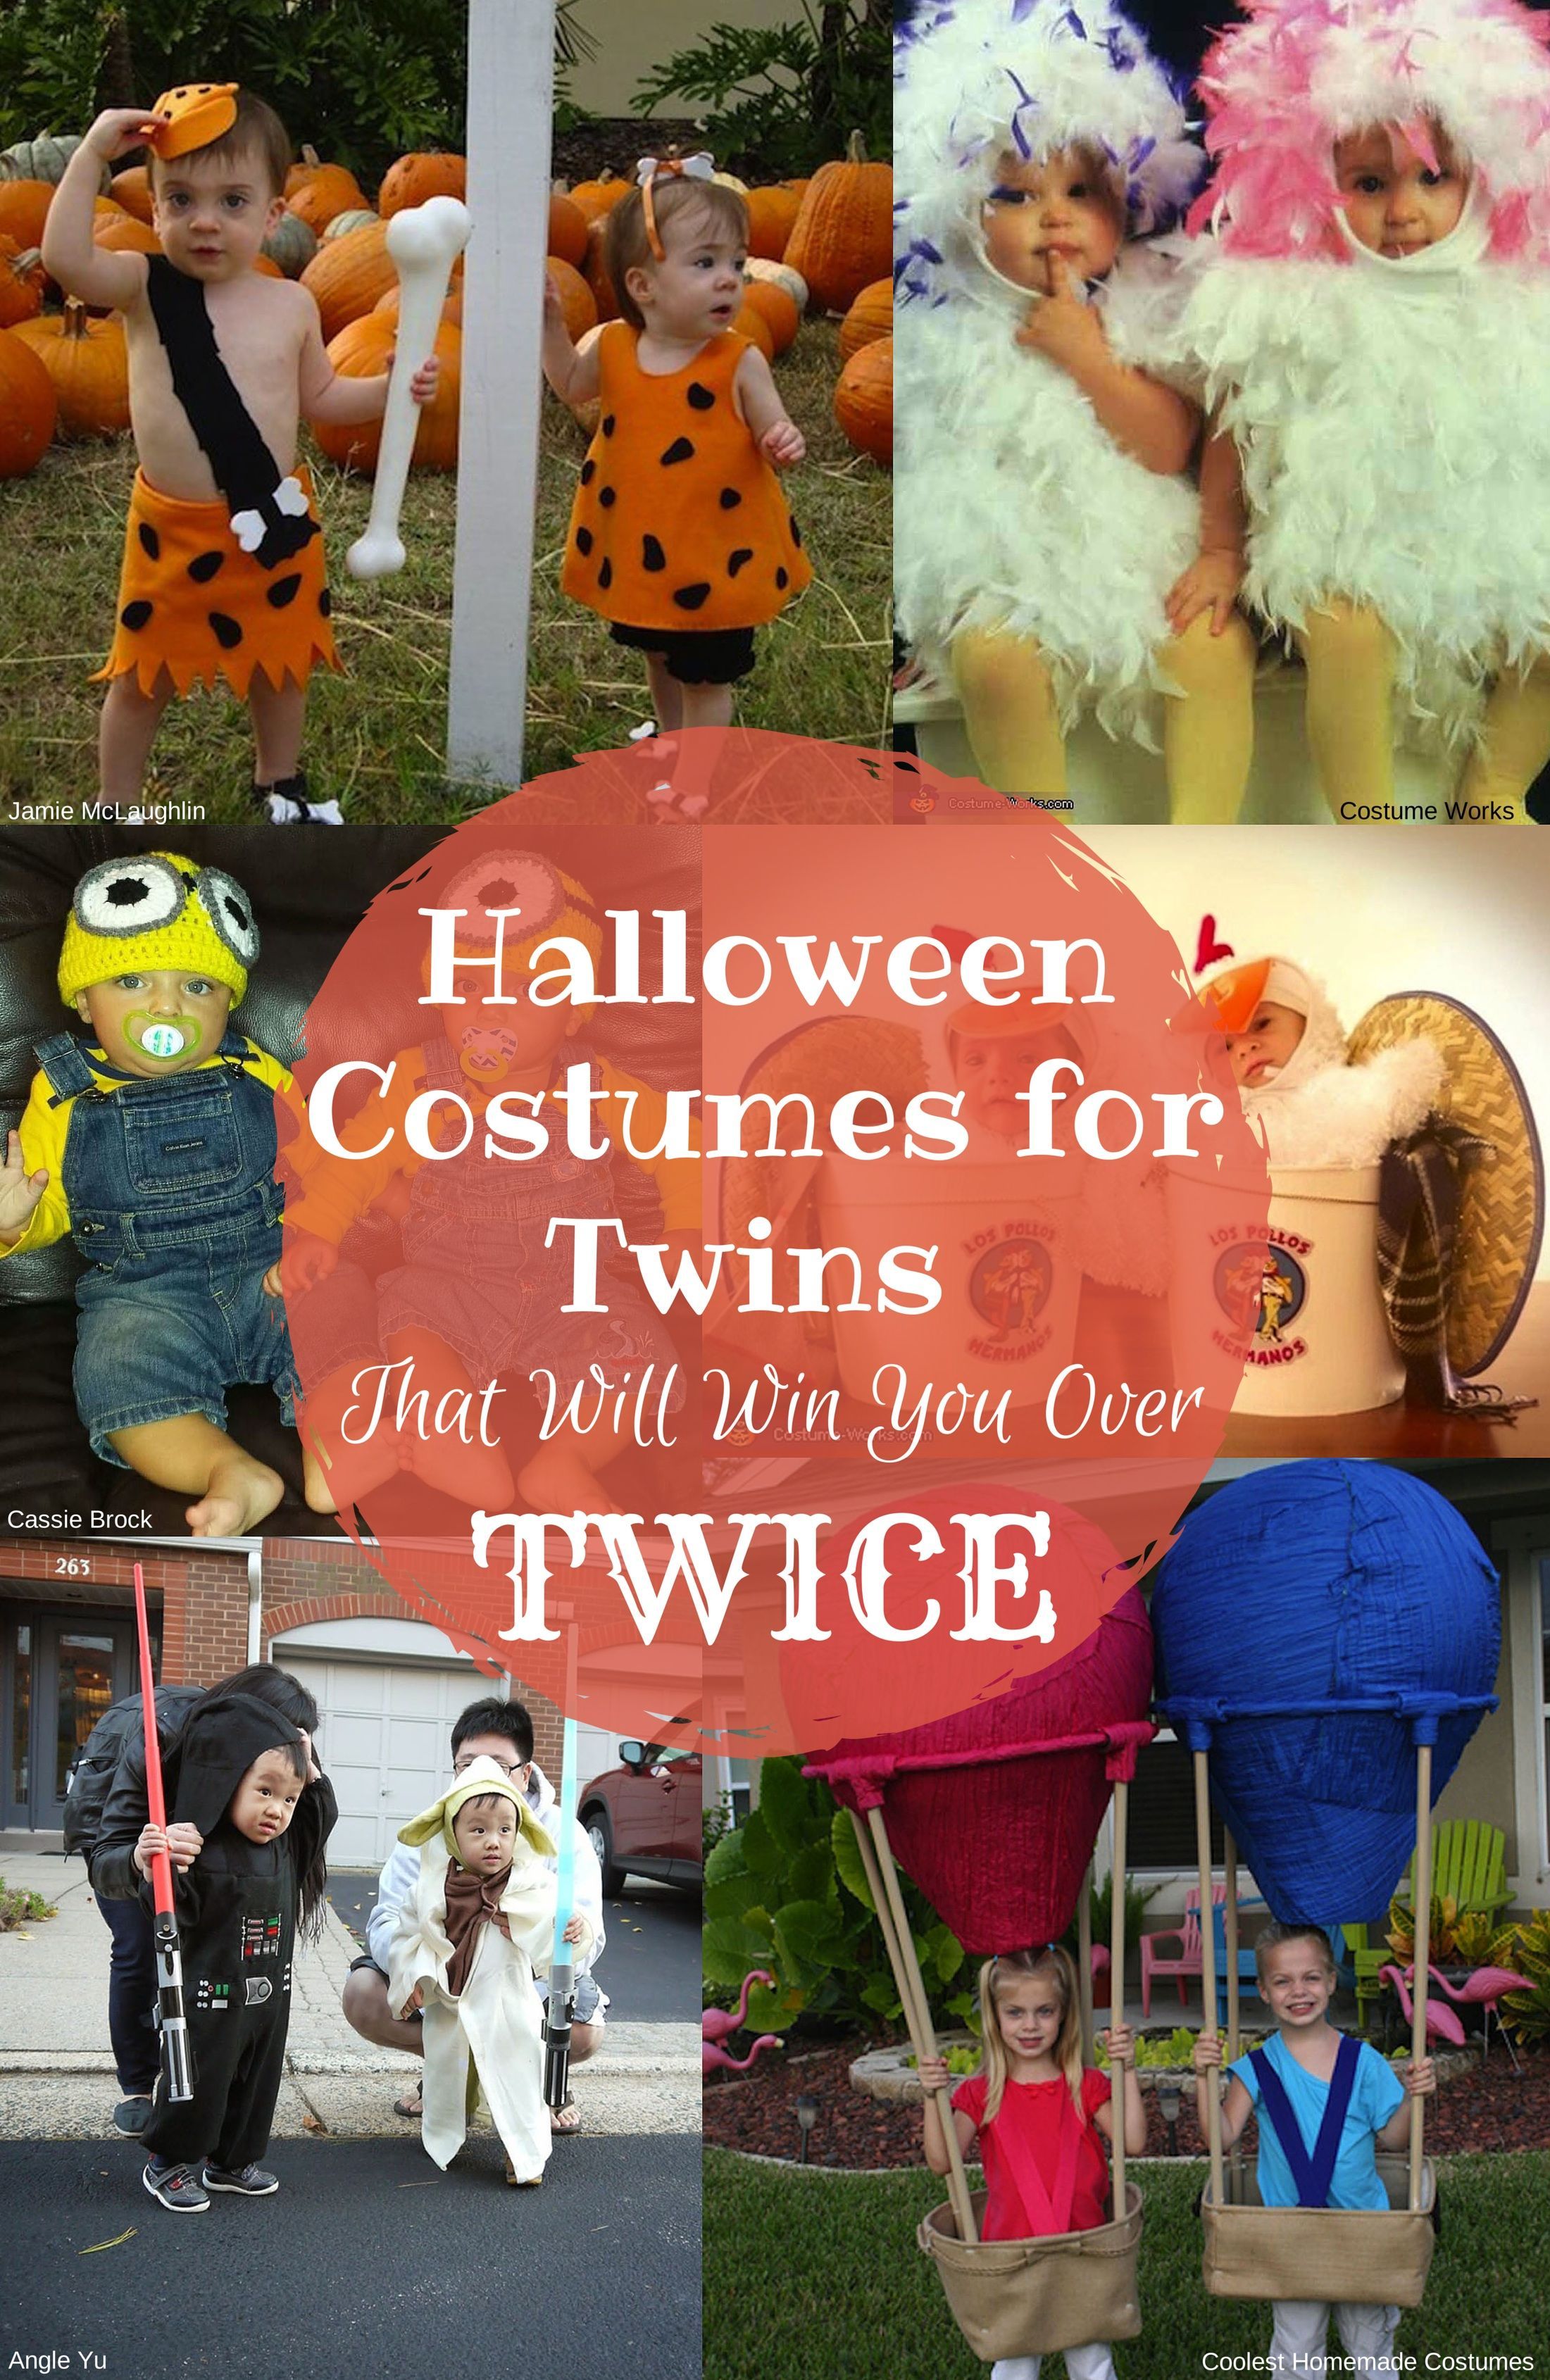 Halloween costumes for twins! Could easily be used for best friends and couples also.